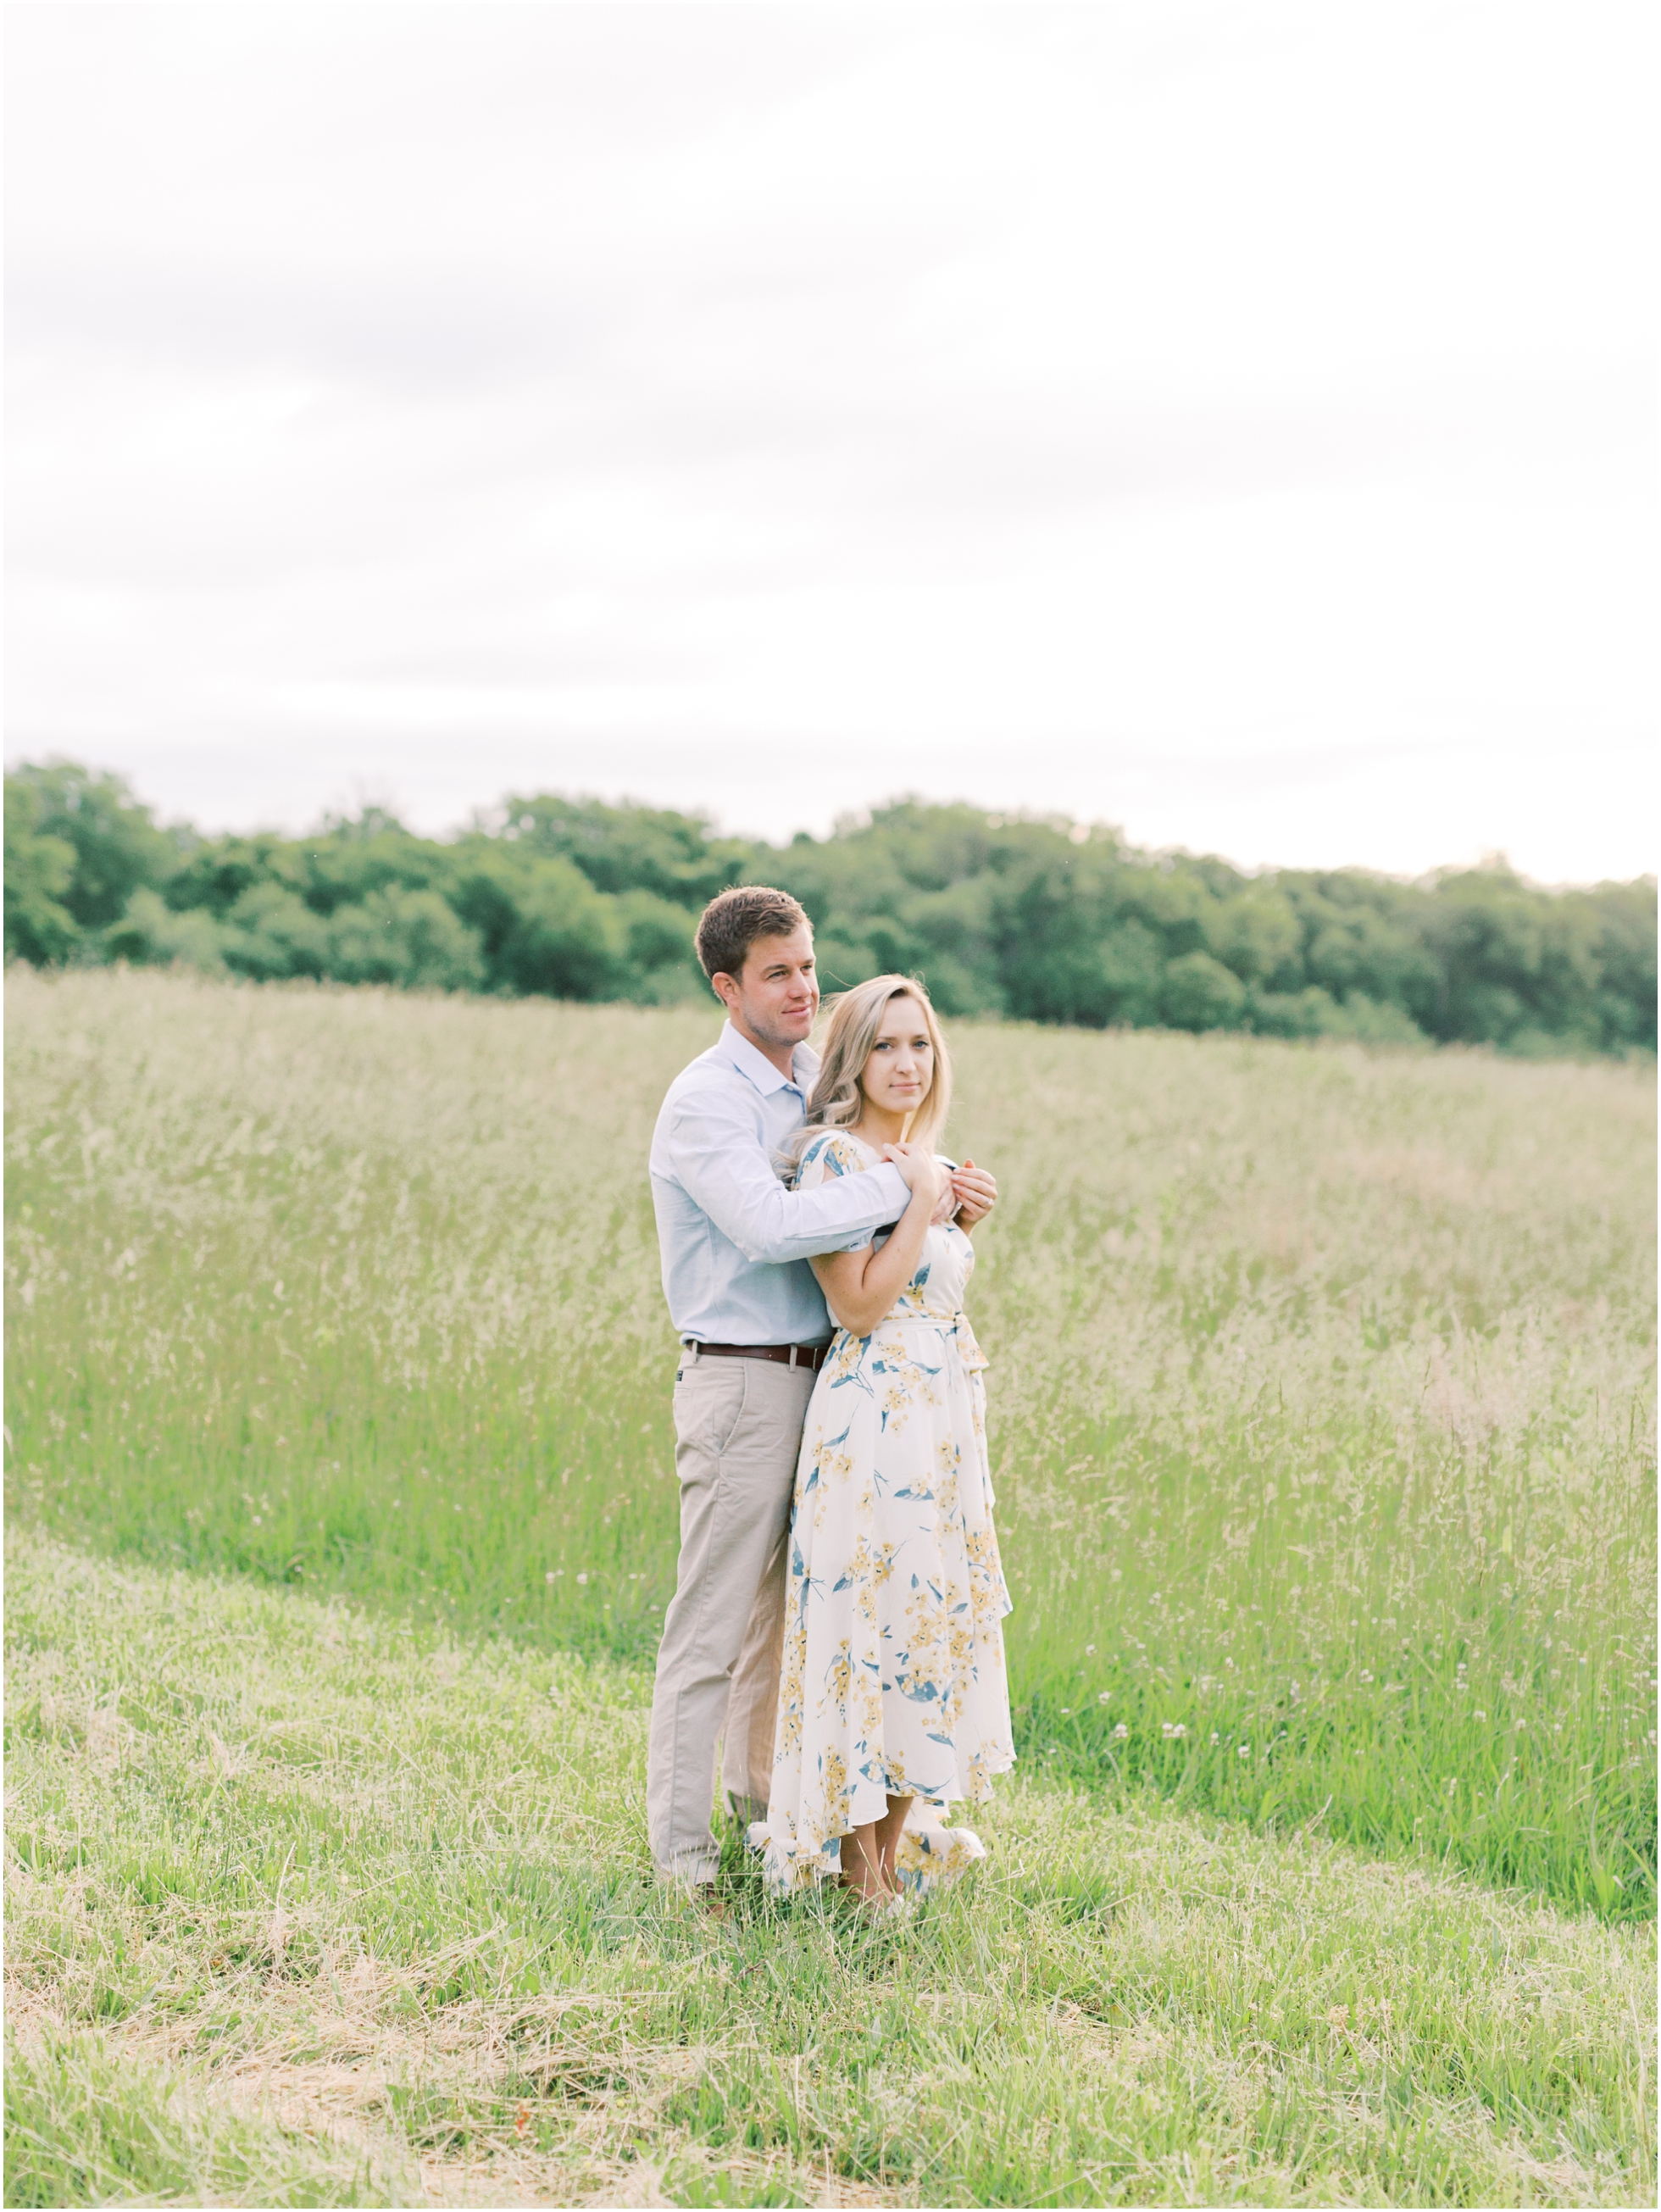 Gorgeous Sunrise Engagement Session at Morven Park in May 